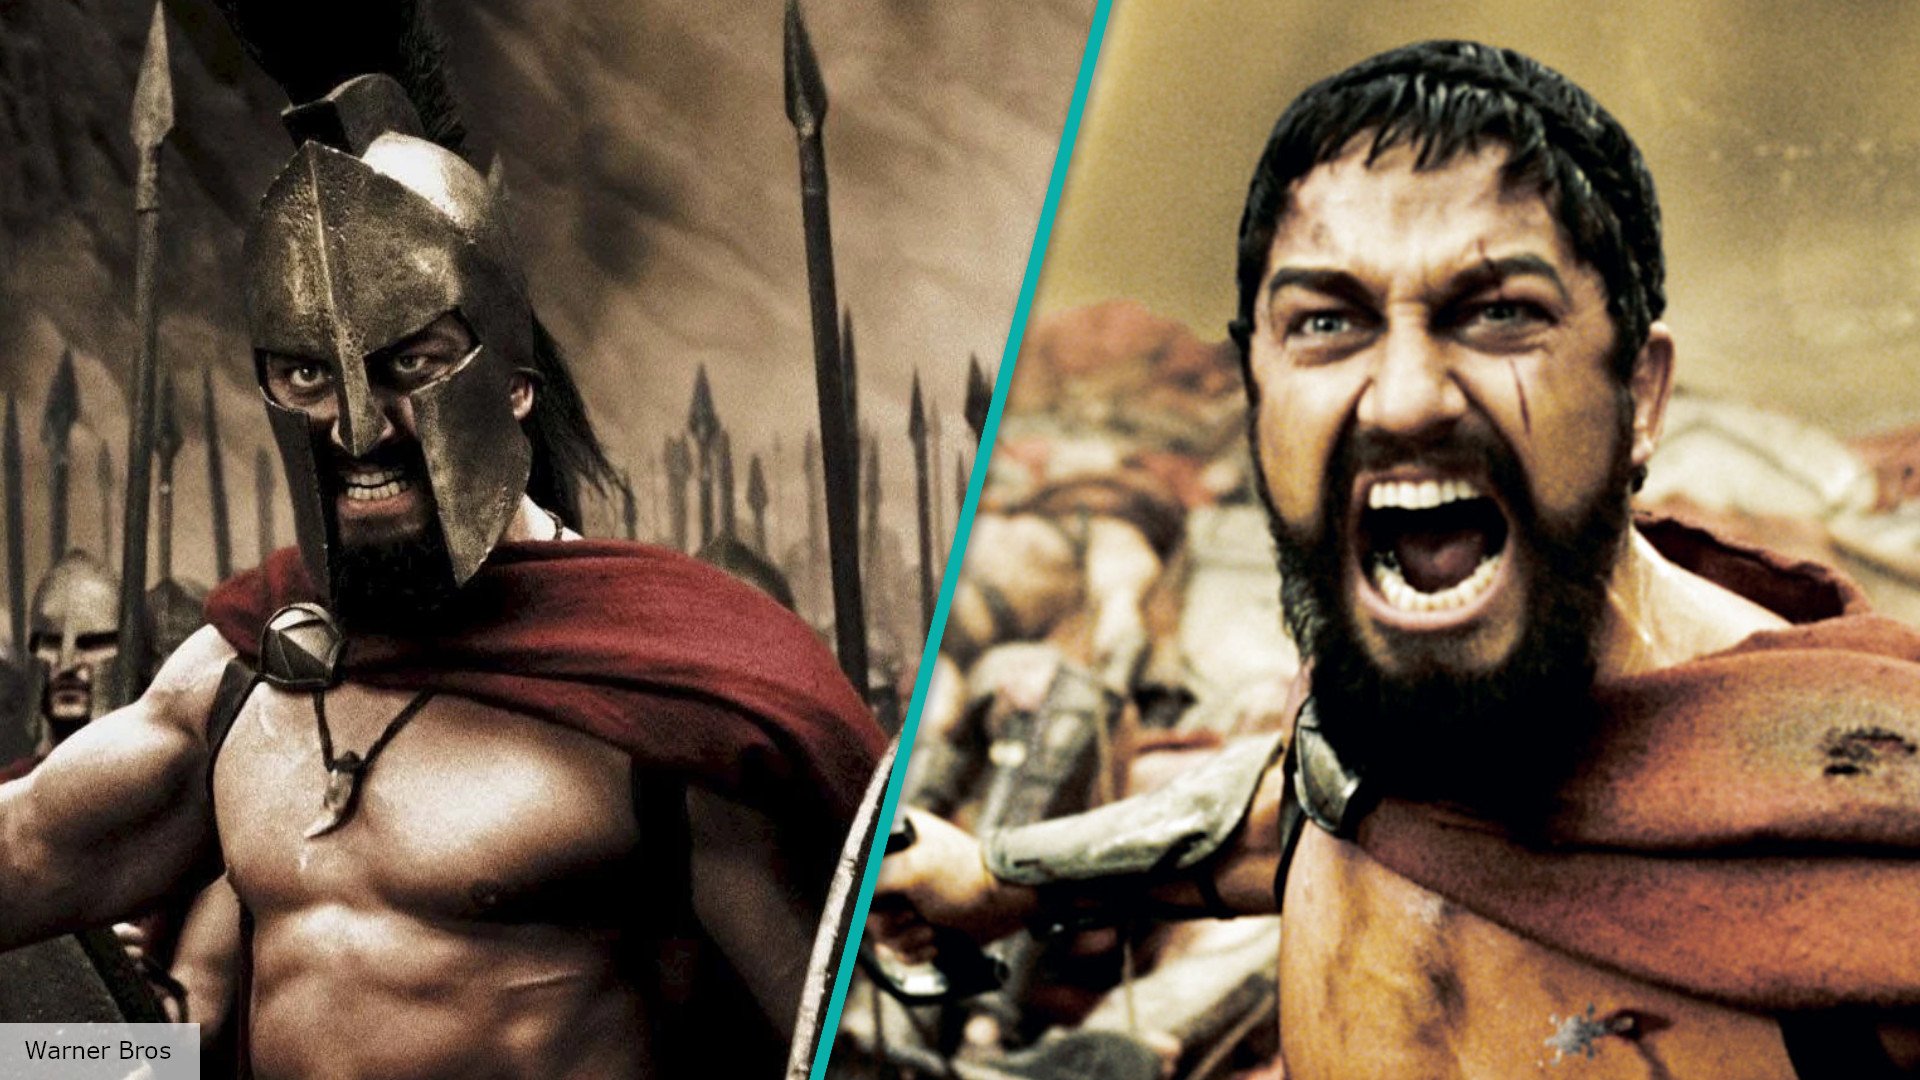 Was the story of the movie 300 a real life story? - Quora